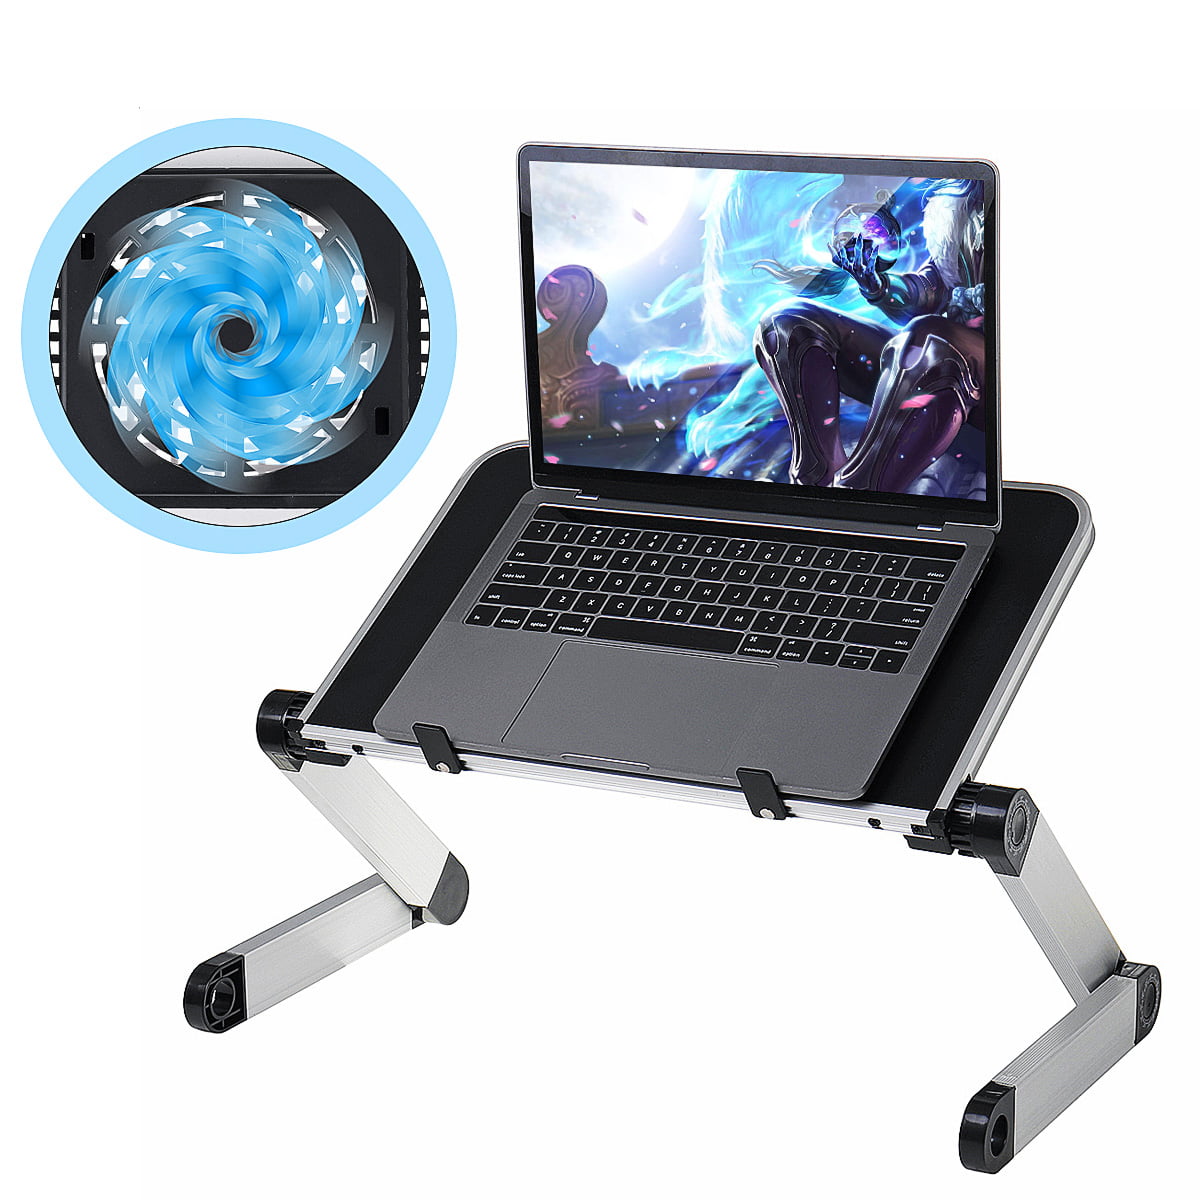 Black Laptop Table Support Stand Desk Bed Sofa Tray Study Table Home Work Reading Holds up to 17 laptops improves ventilation around your laptop Desk 